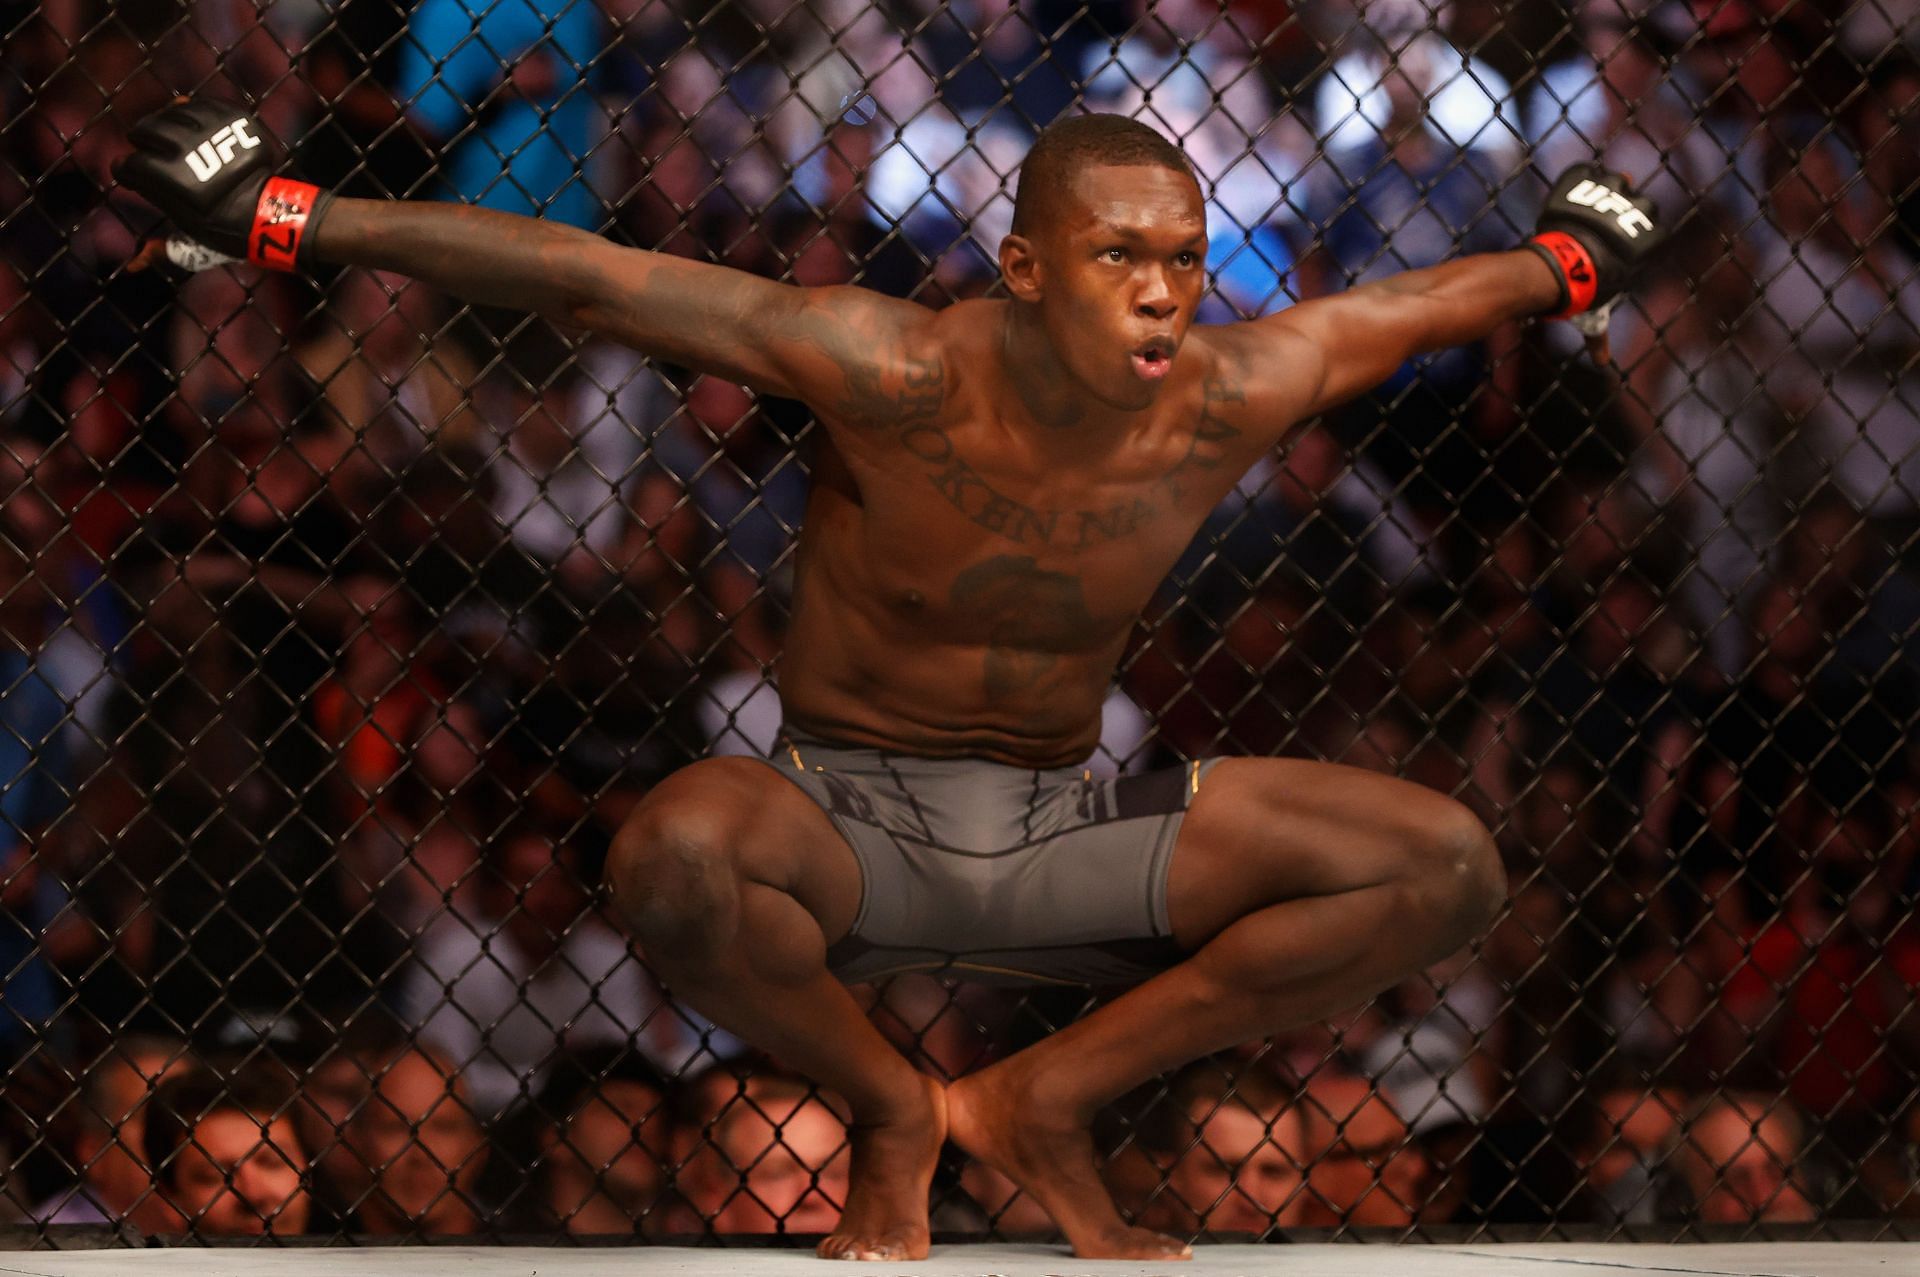 UFC middleweight champion Israel Adesanya has become a superstar in a short period of time